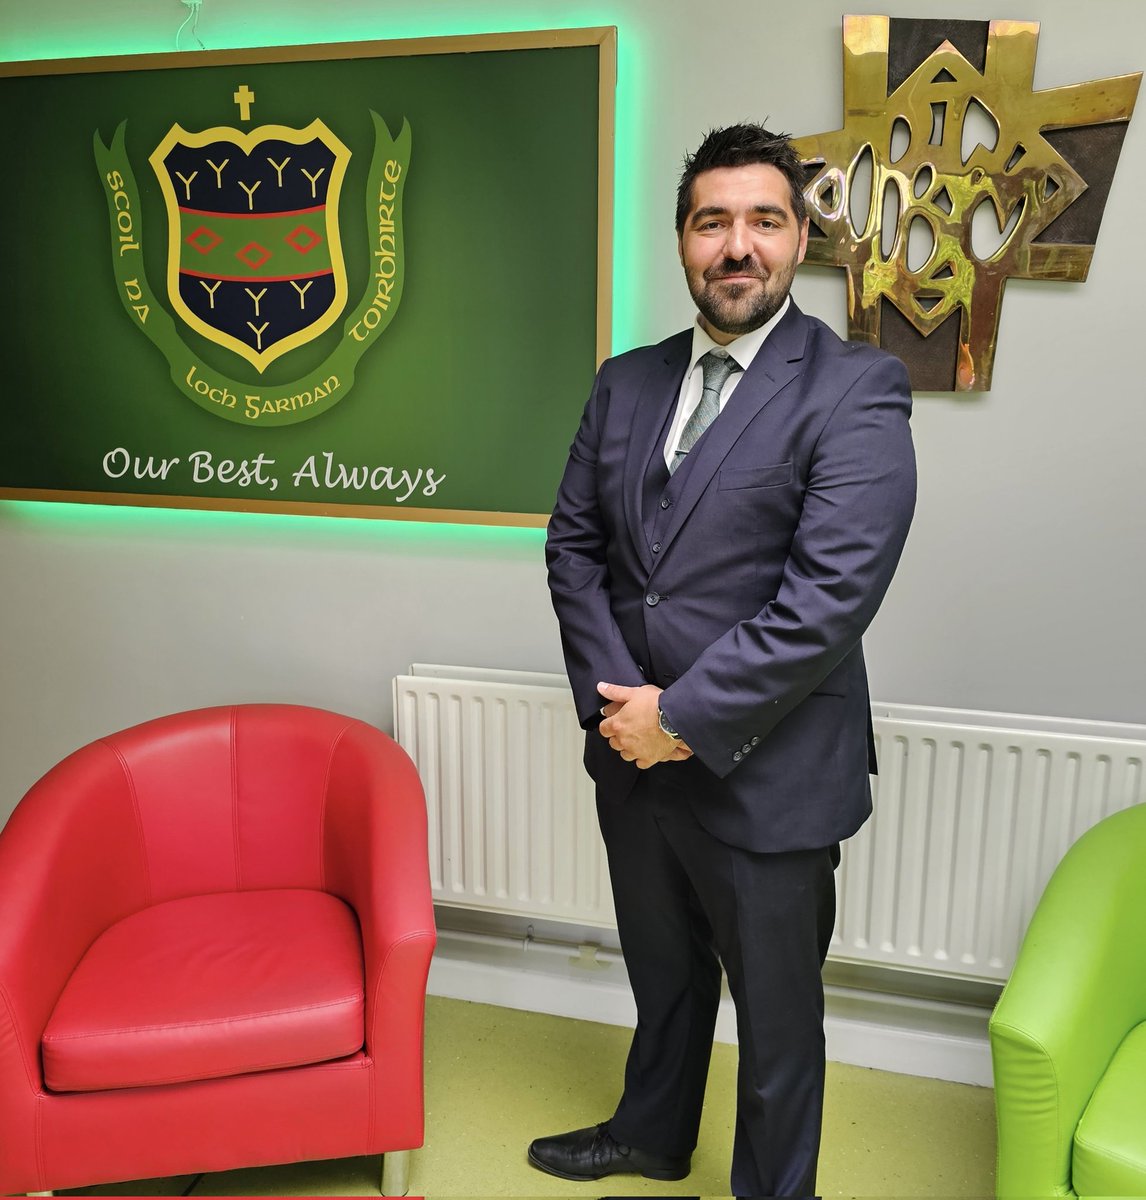 The Board of Management of PSS, Wexford, is pleased to announce the appointment of Mr. Scott Gaynor as Deputy Principal. He will join the current senior leadership team from the 1st of September. We wish him well in the new role.